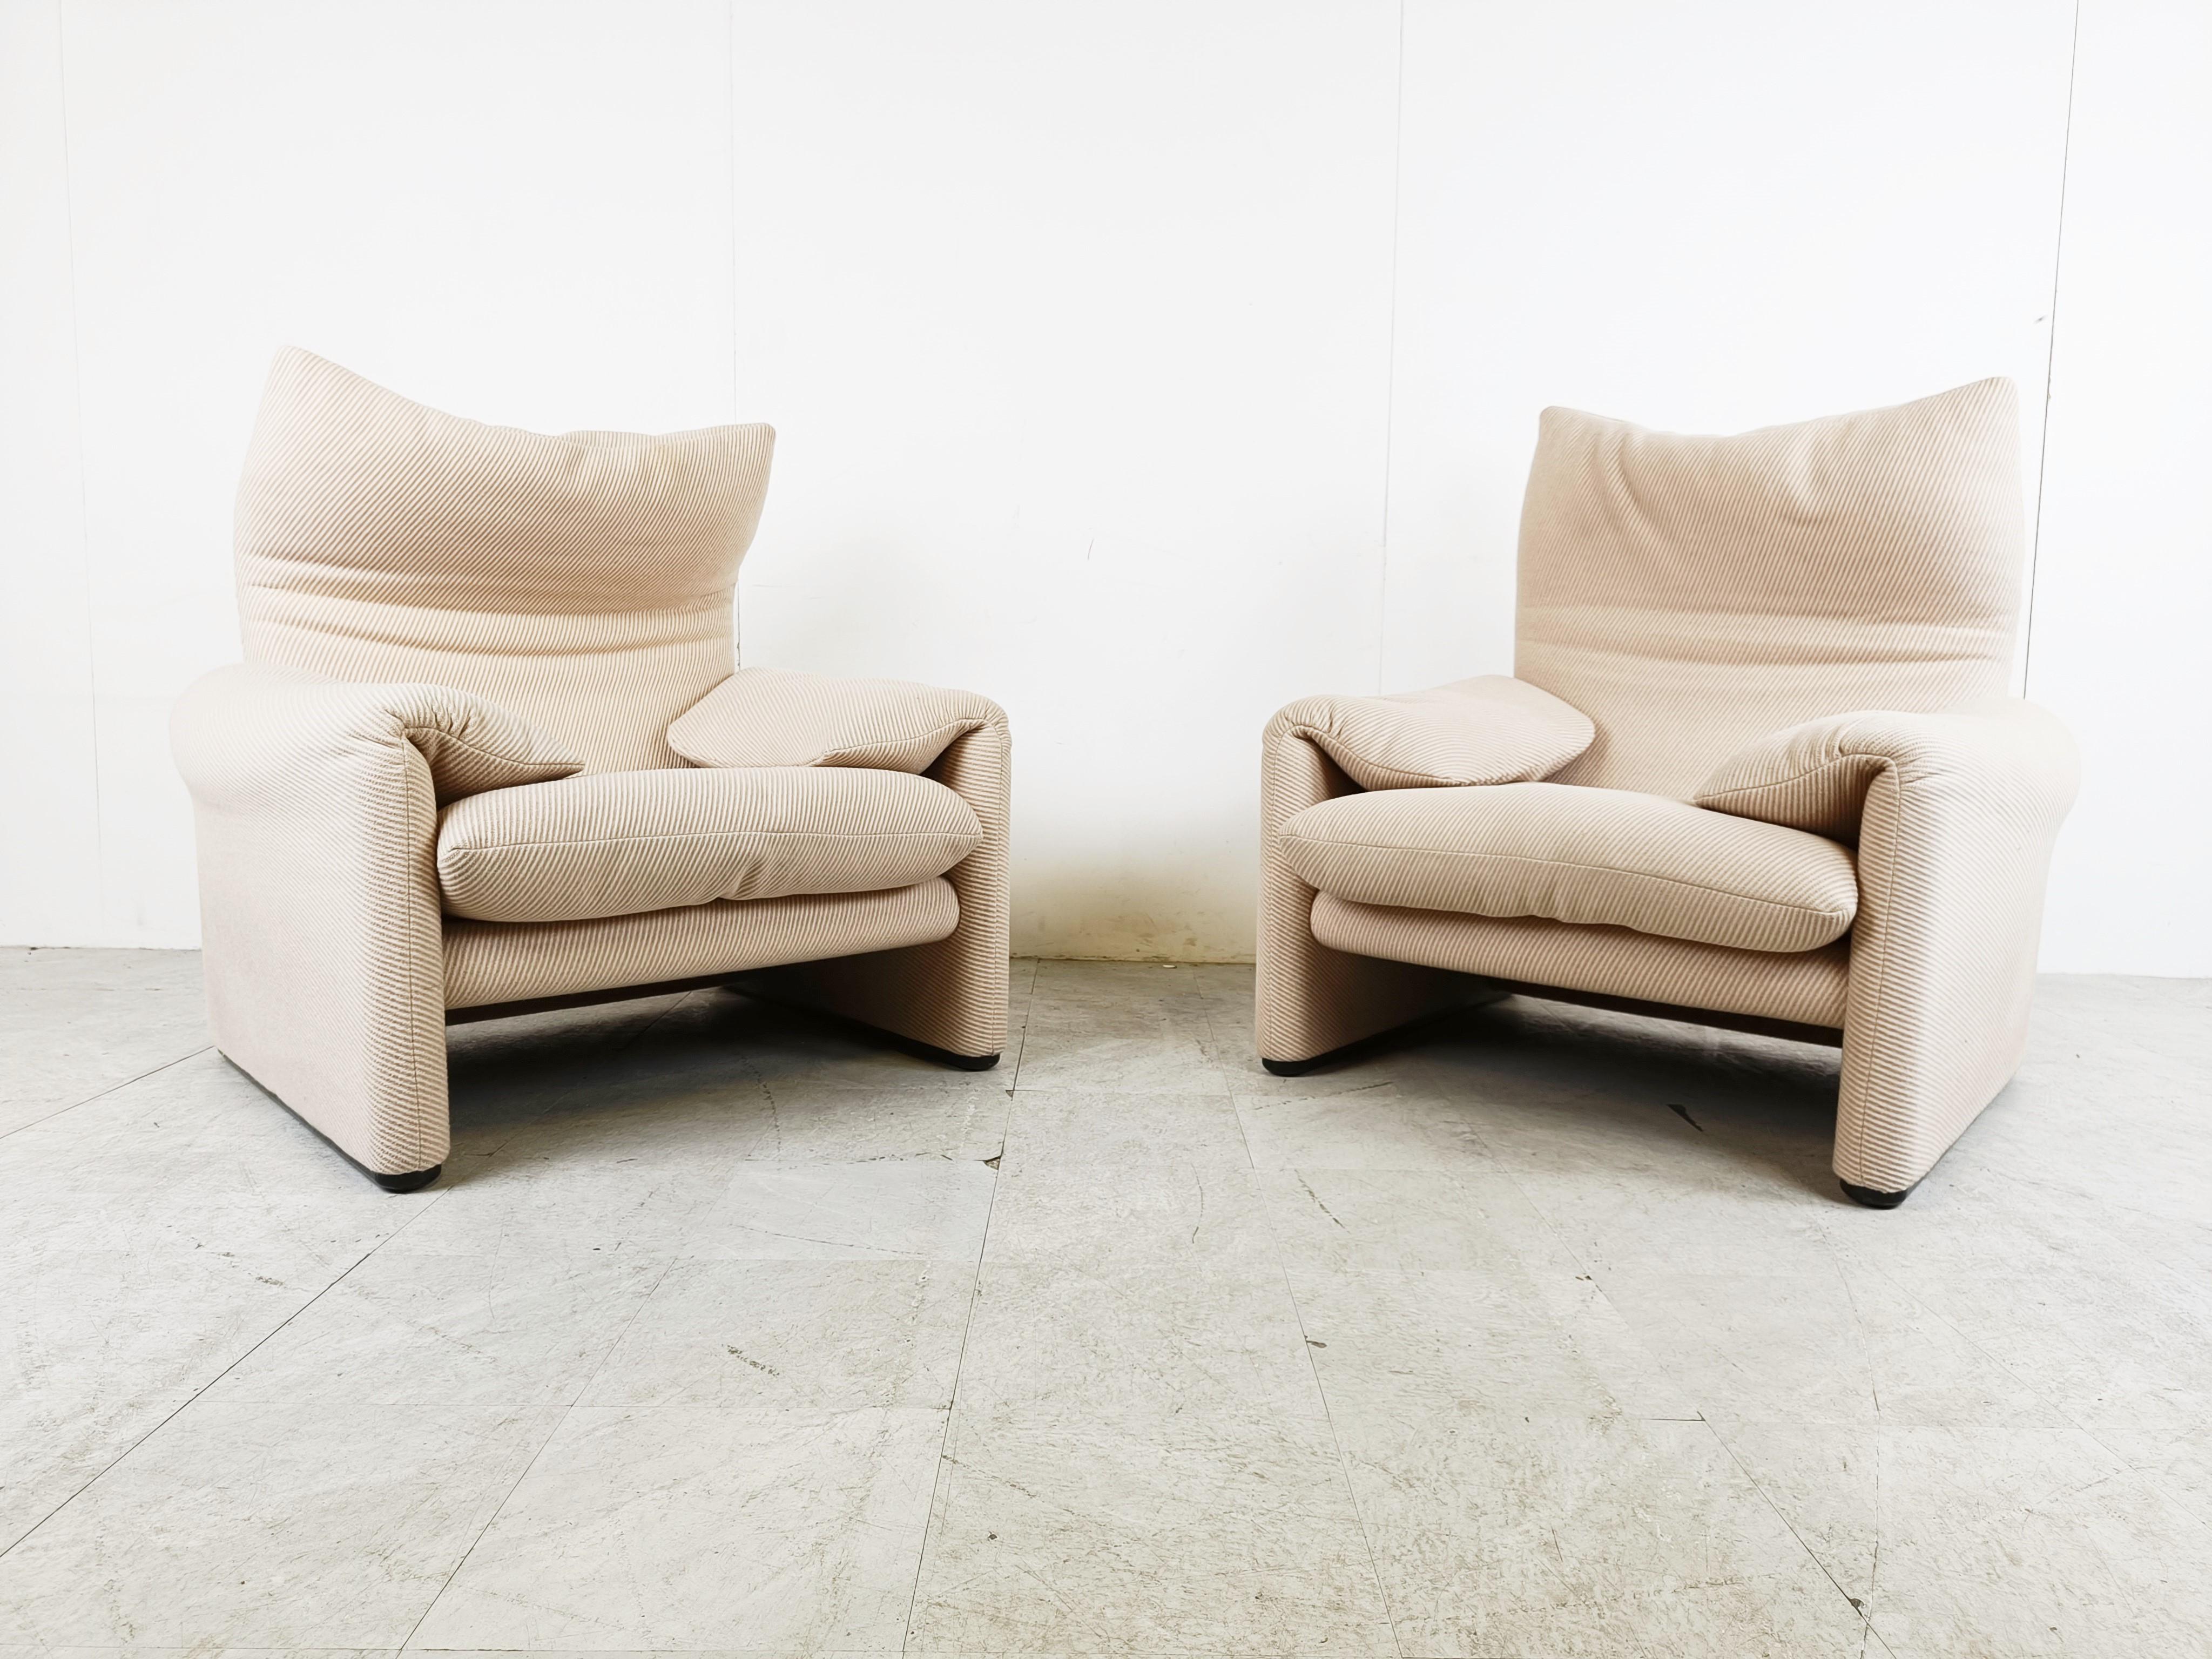 Fabric Pair of Maralunga armchair by Vico Magistretti for Cassina, 1973 